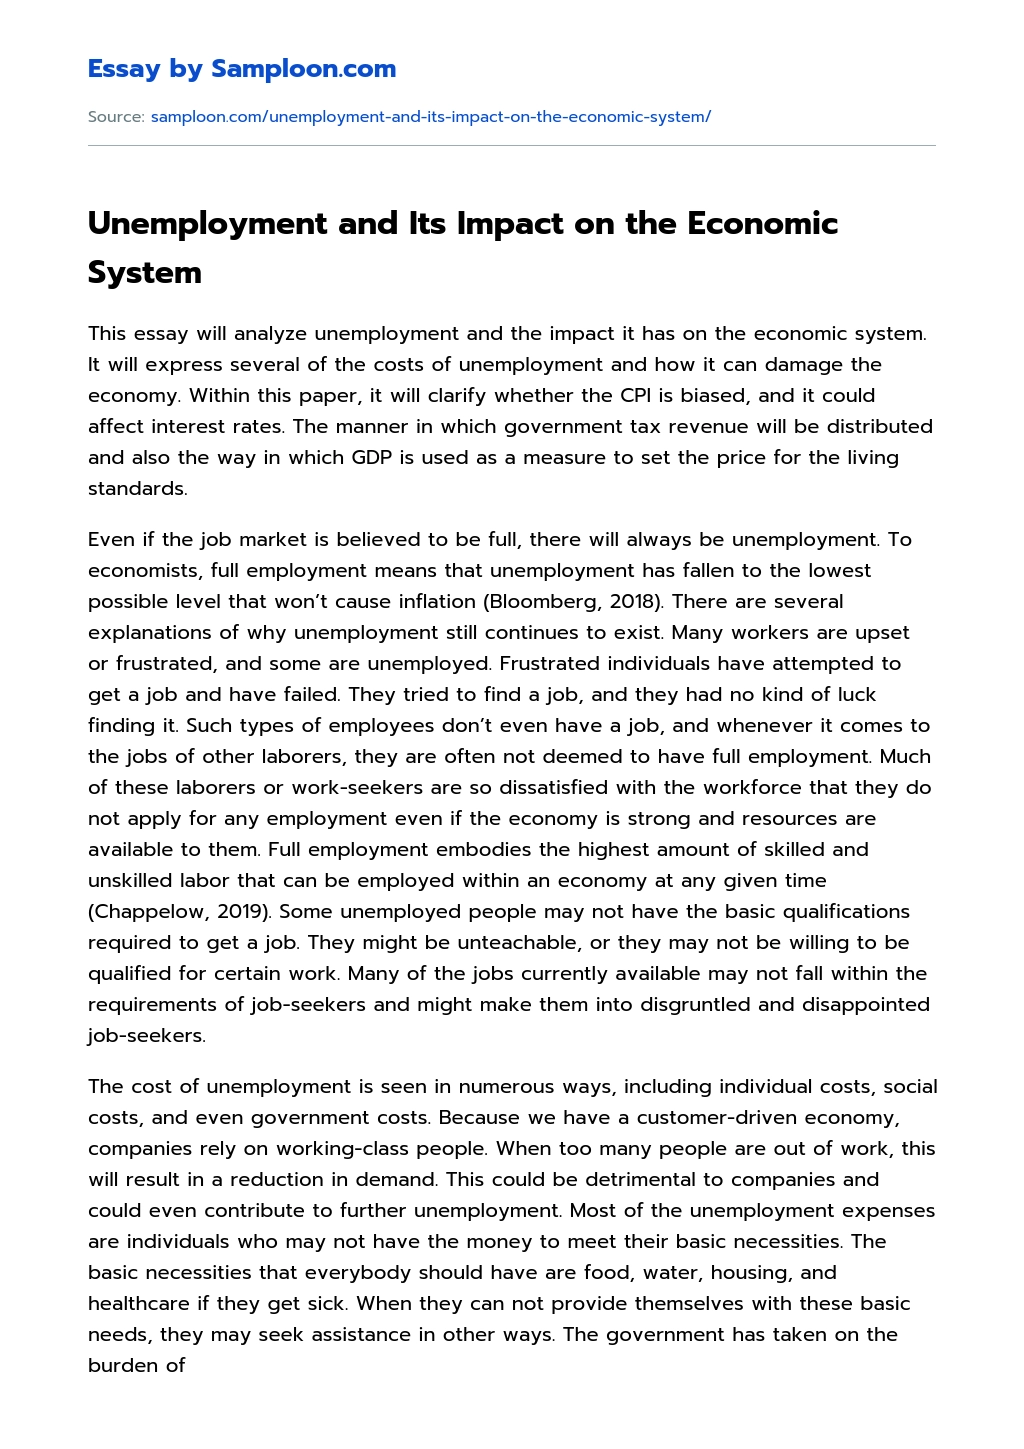 Unemployment and Its Impact on the Economic System essay